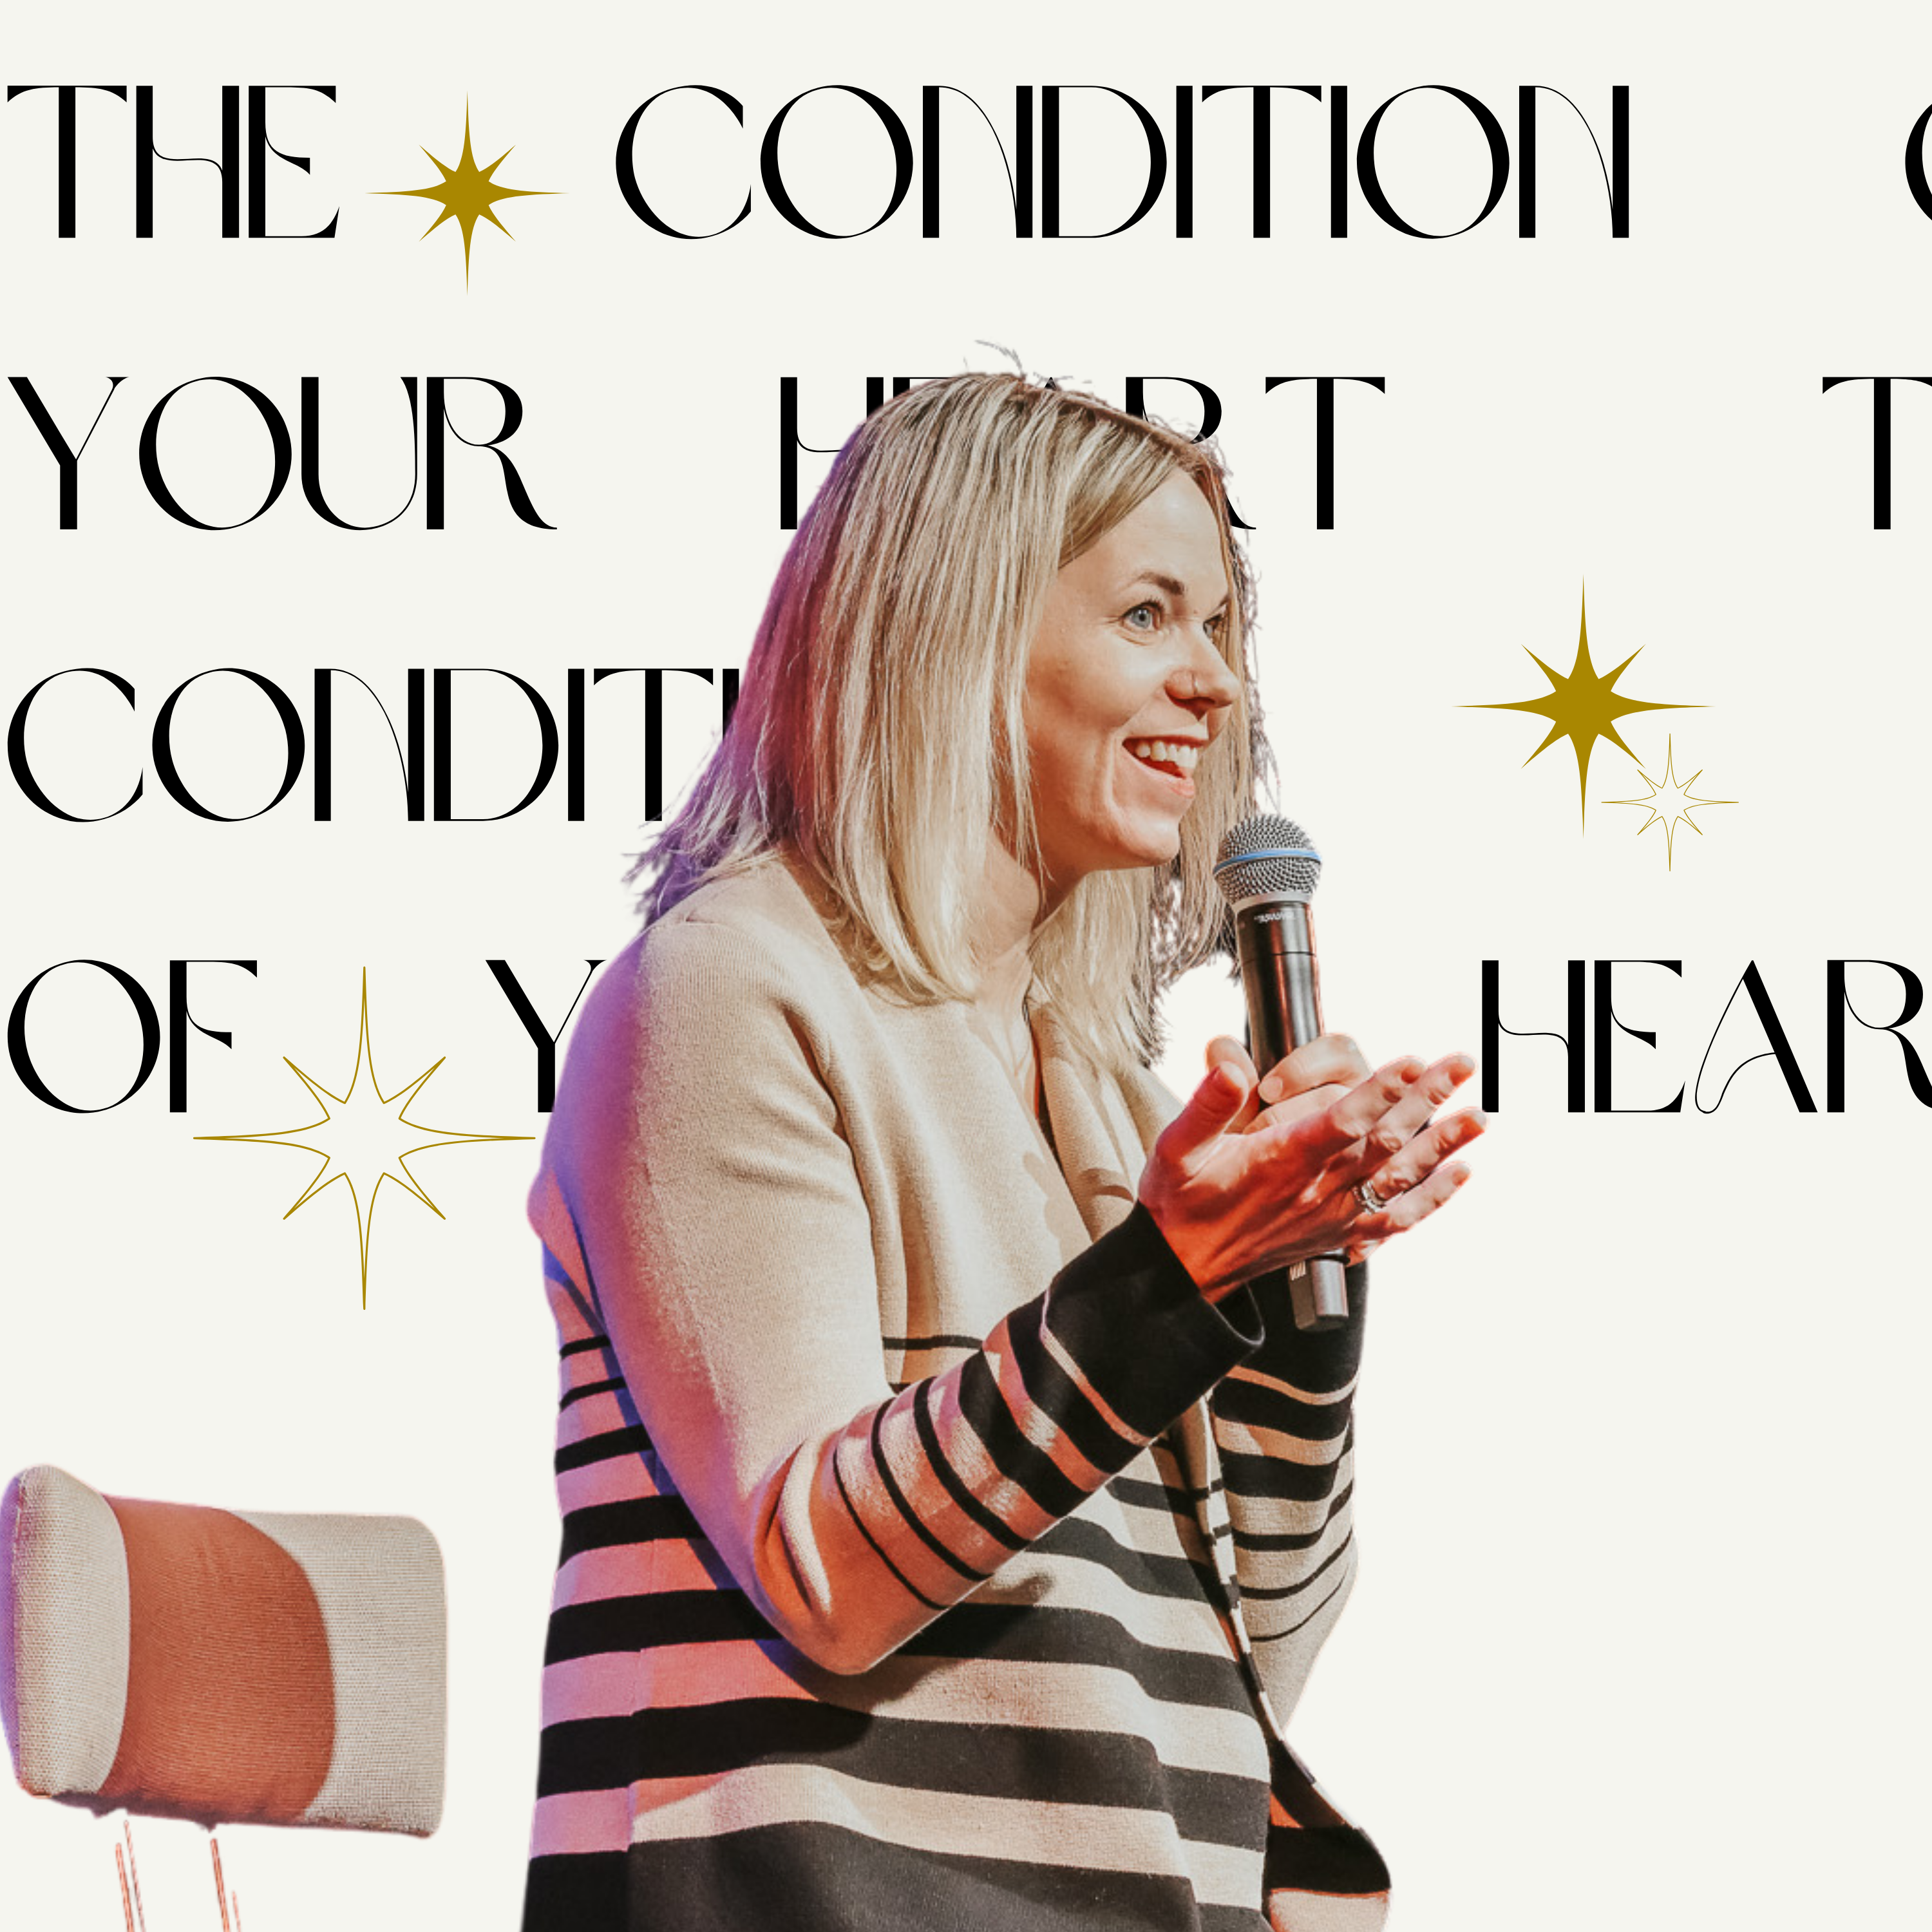 The Condition of Your Heart